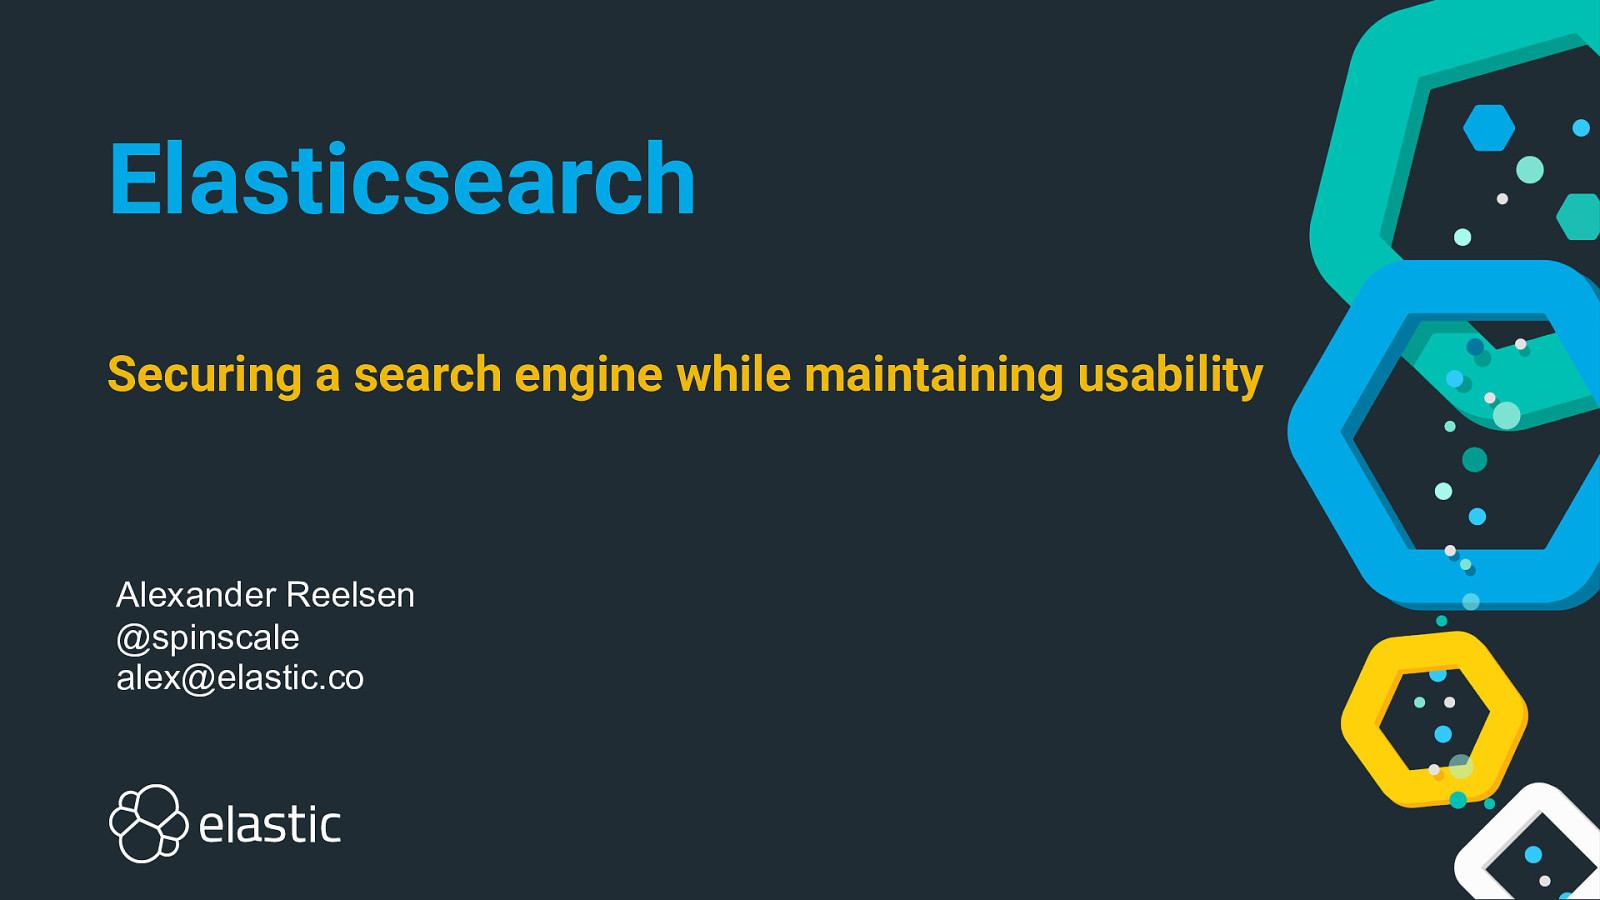 Elasticsearch - Securing a search engine while maintaining usability